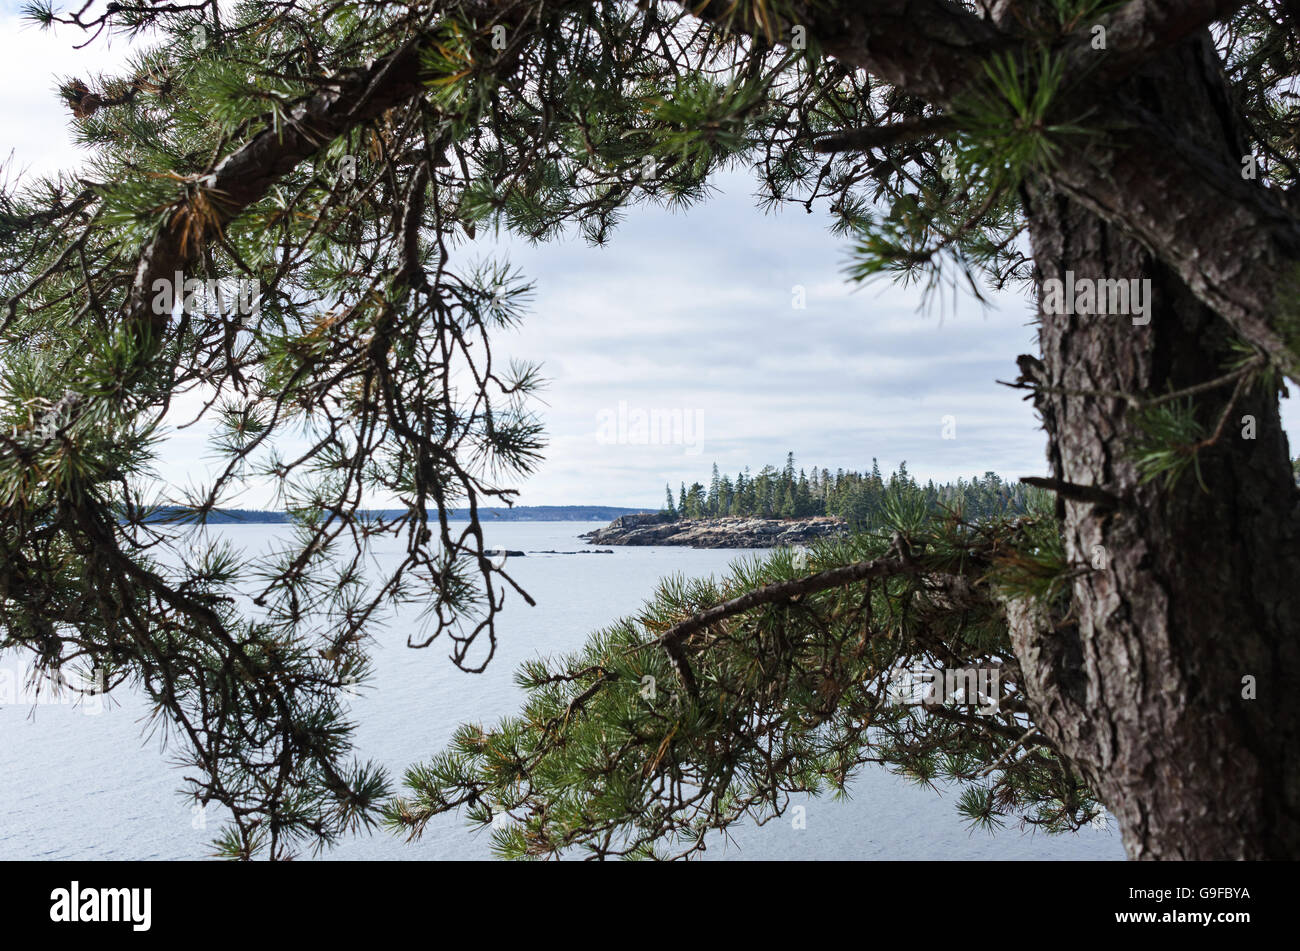 The branches of a Pitch Pine frame the view across Seal Harbor, Maine. Stock Photo